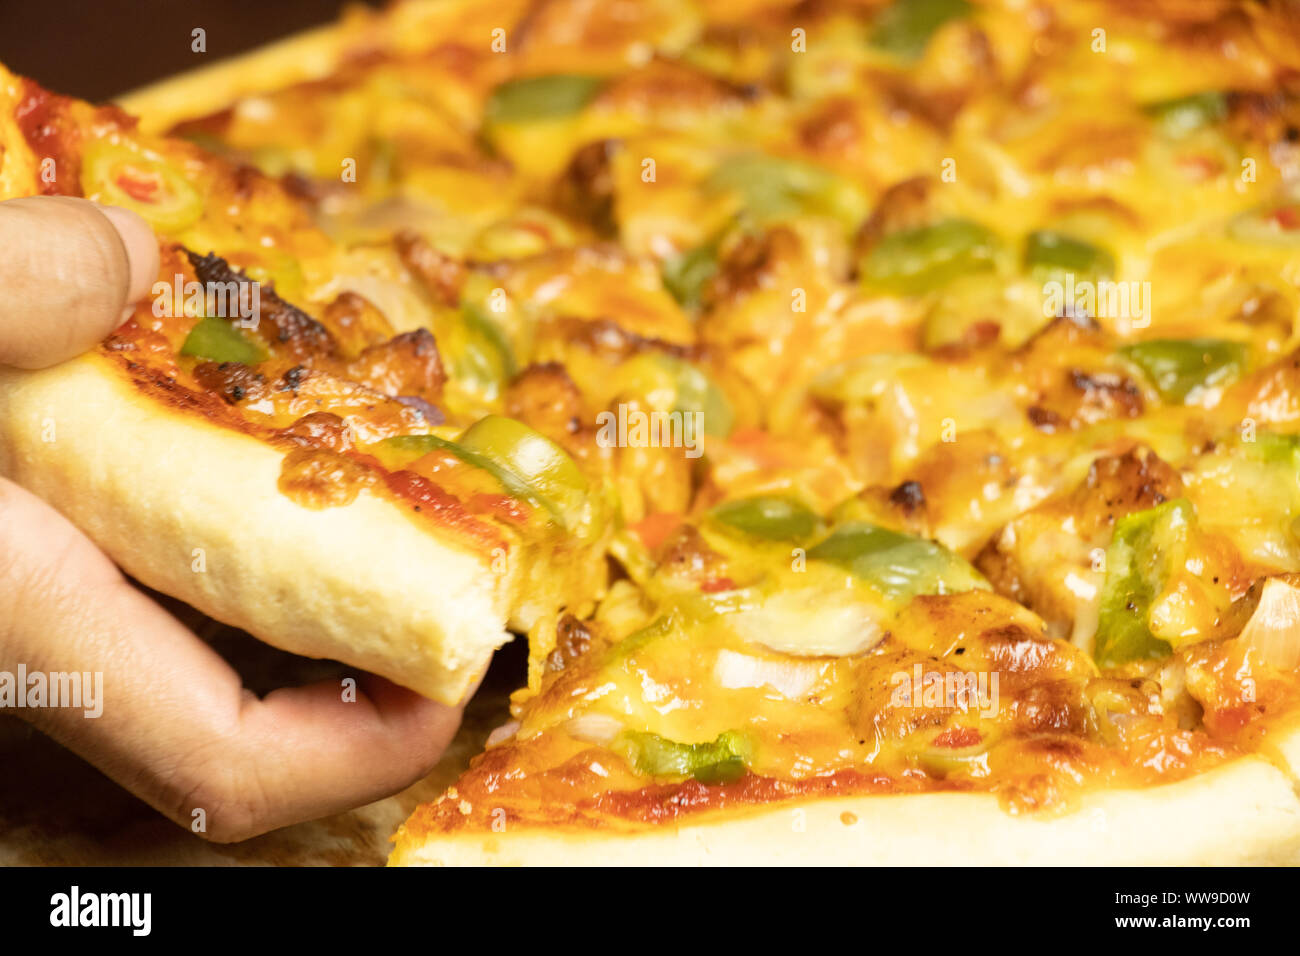 Pan Pizza Slice Take From Hand Side View With Dark Brown Wood Stock Photo Alamy